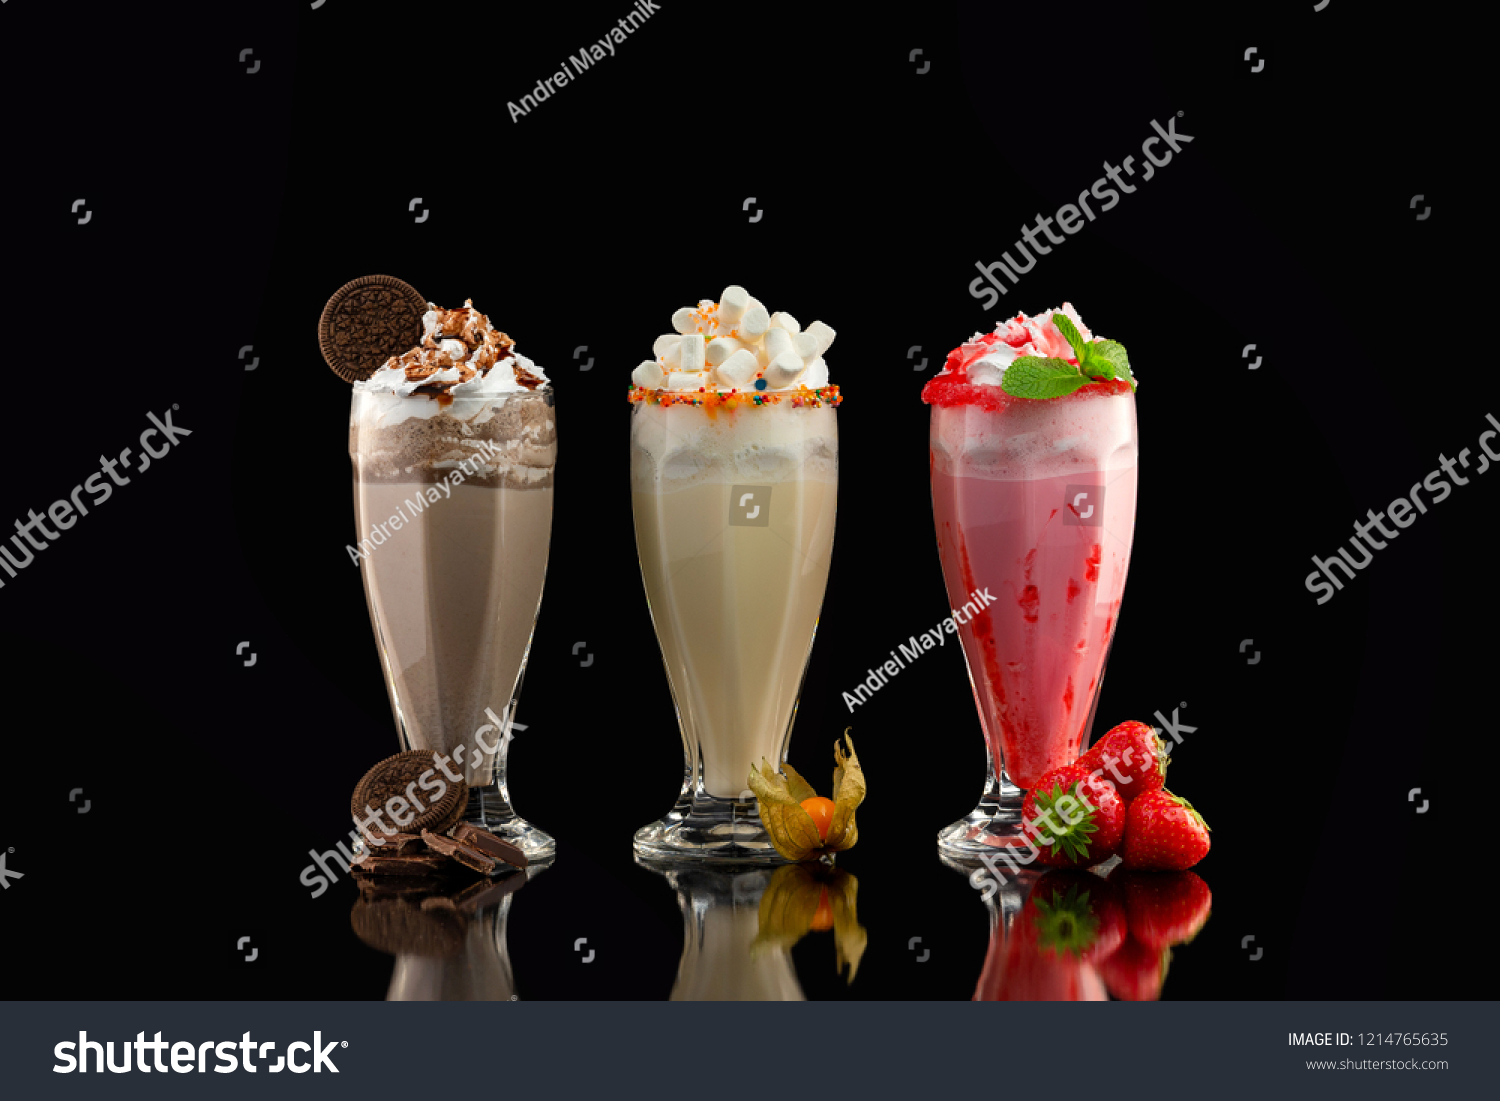 Three glasses of colorful milkshake cocktails - chocolate, strawberry and vanilla decorated with fresh berries and mint isolated at black background. #1214765635